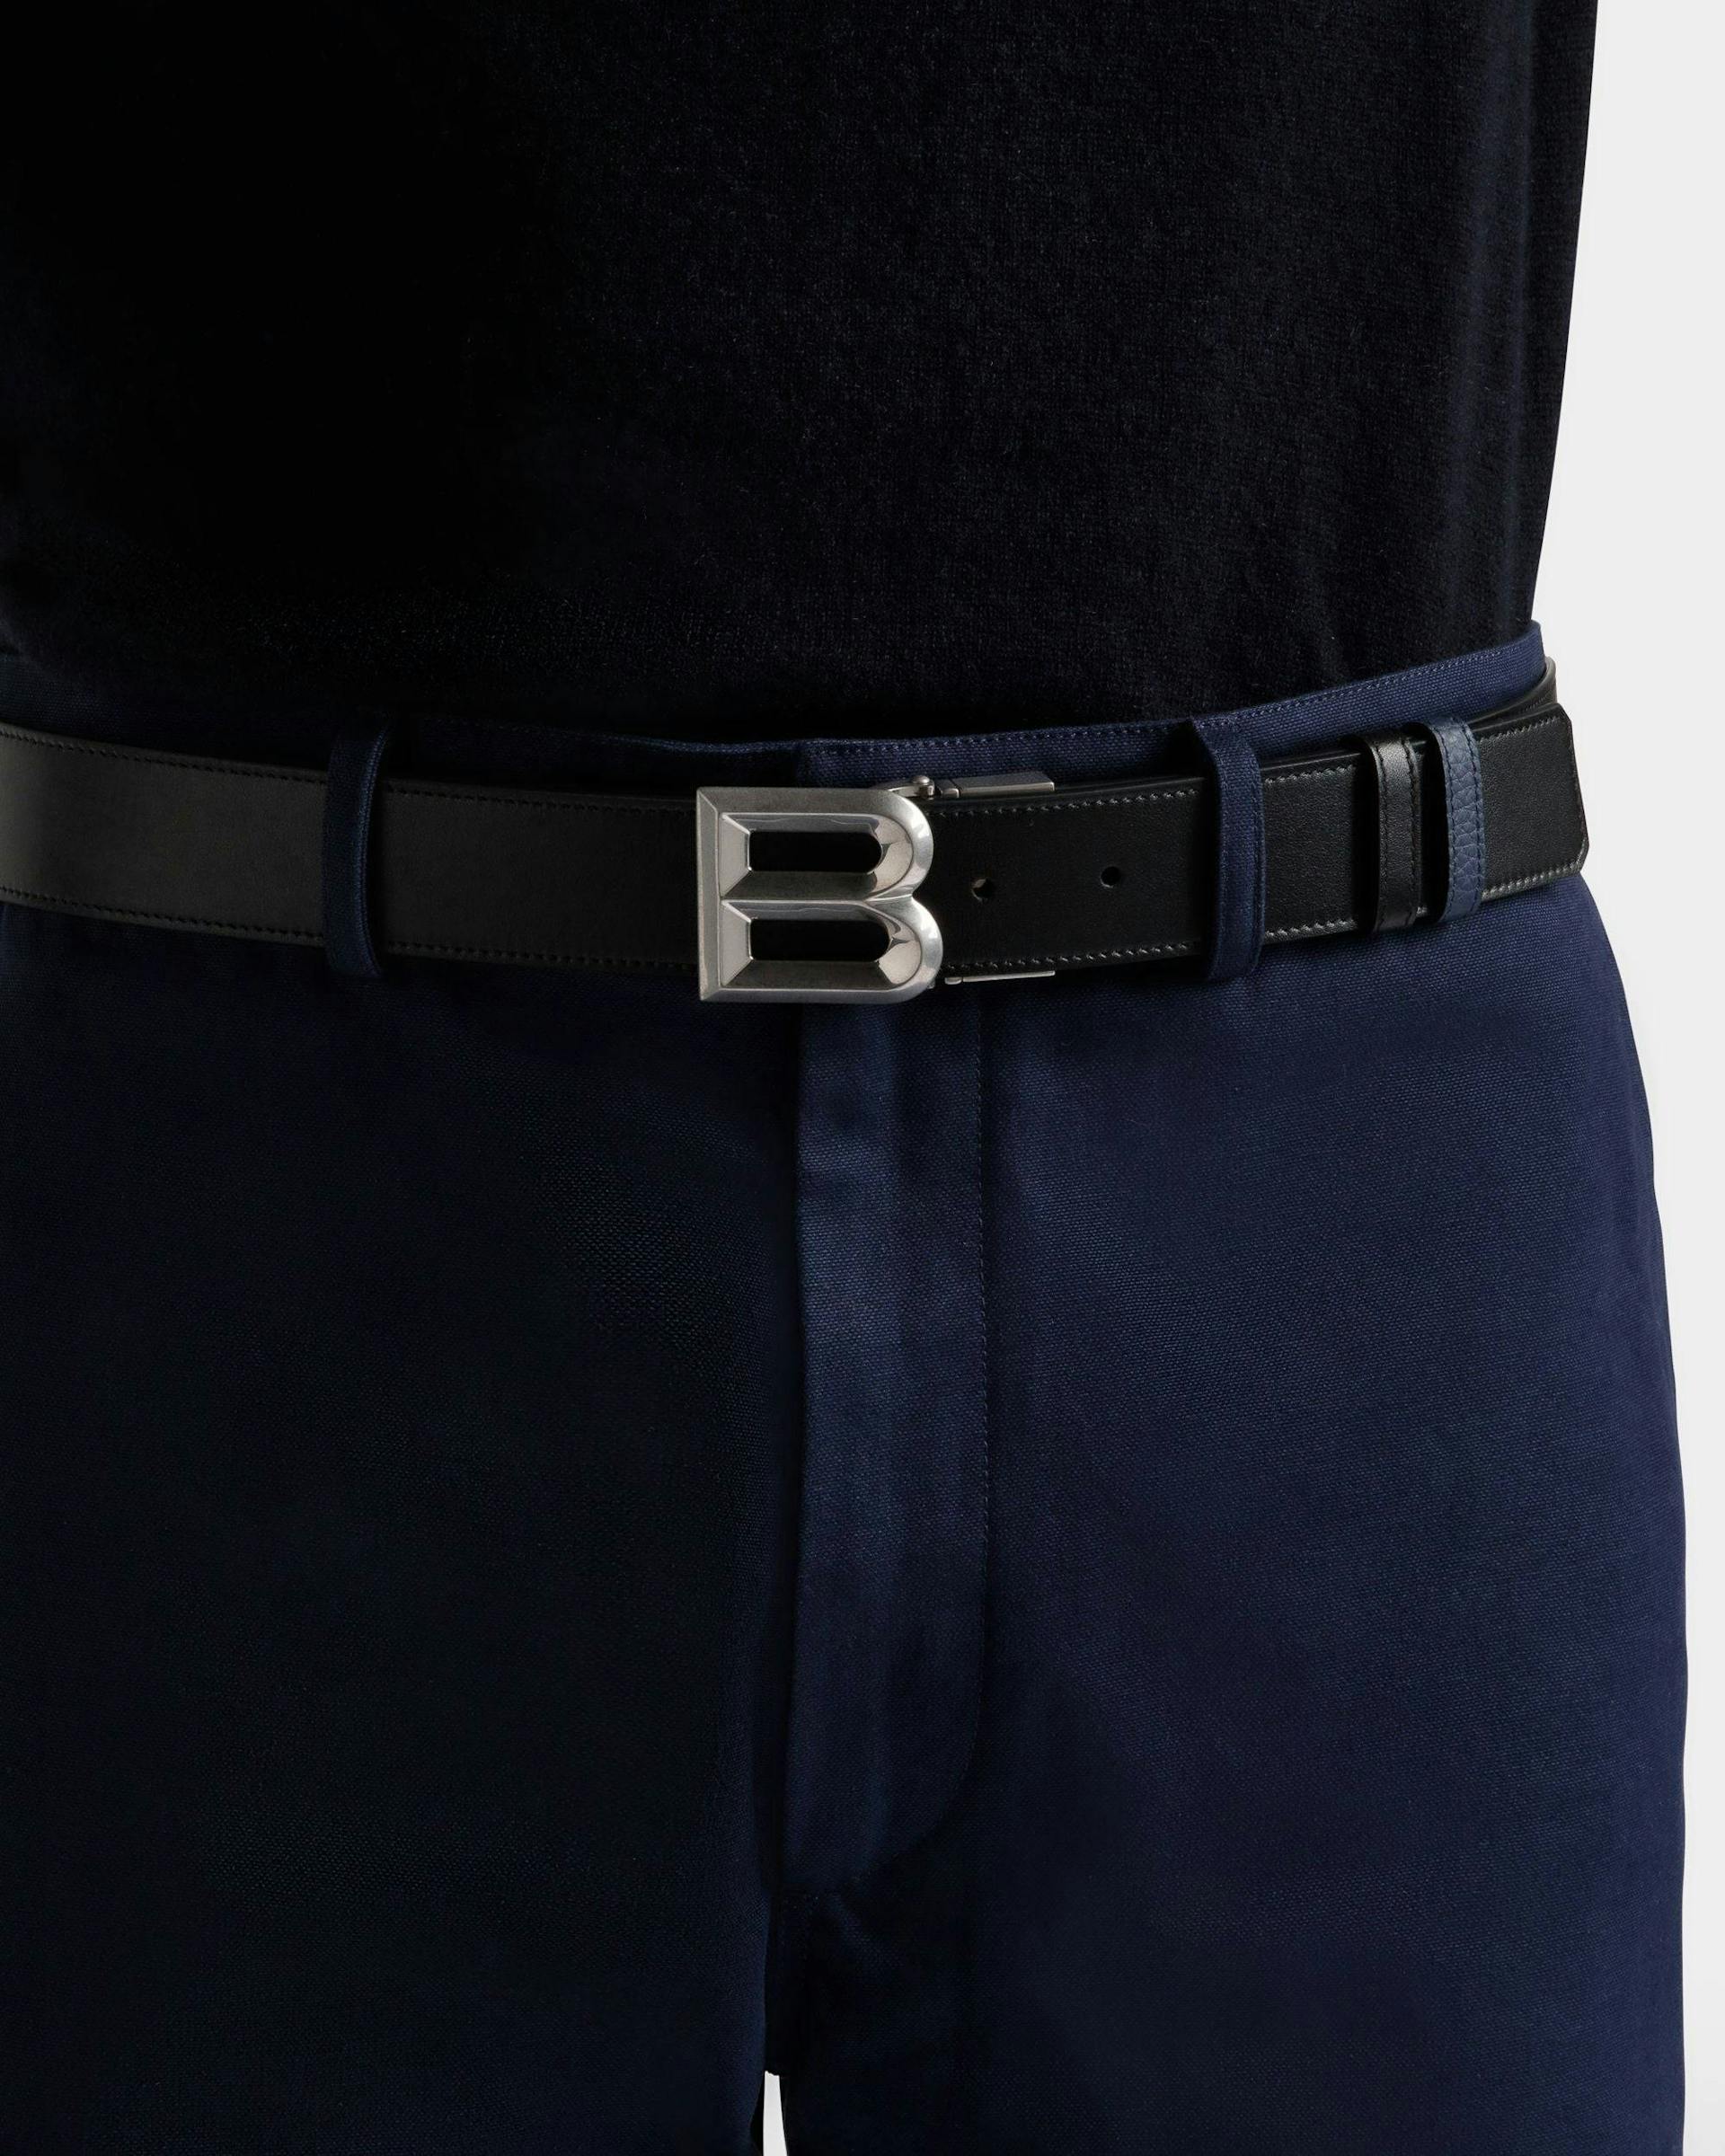 Men's B Bold 35Mm Reversible And Adjustable Belt In Black And Marine Leather | Bally | On Model Front